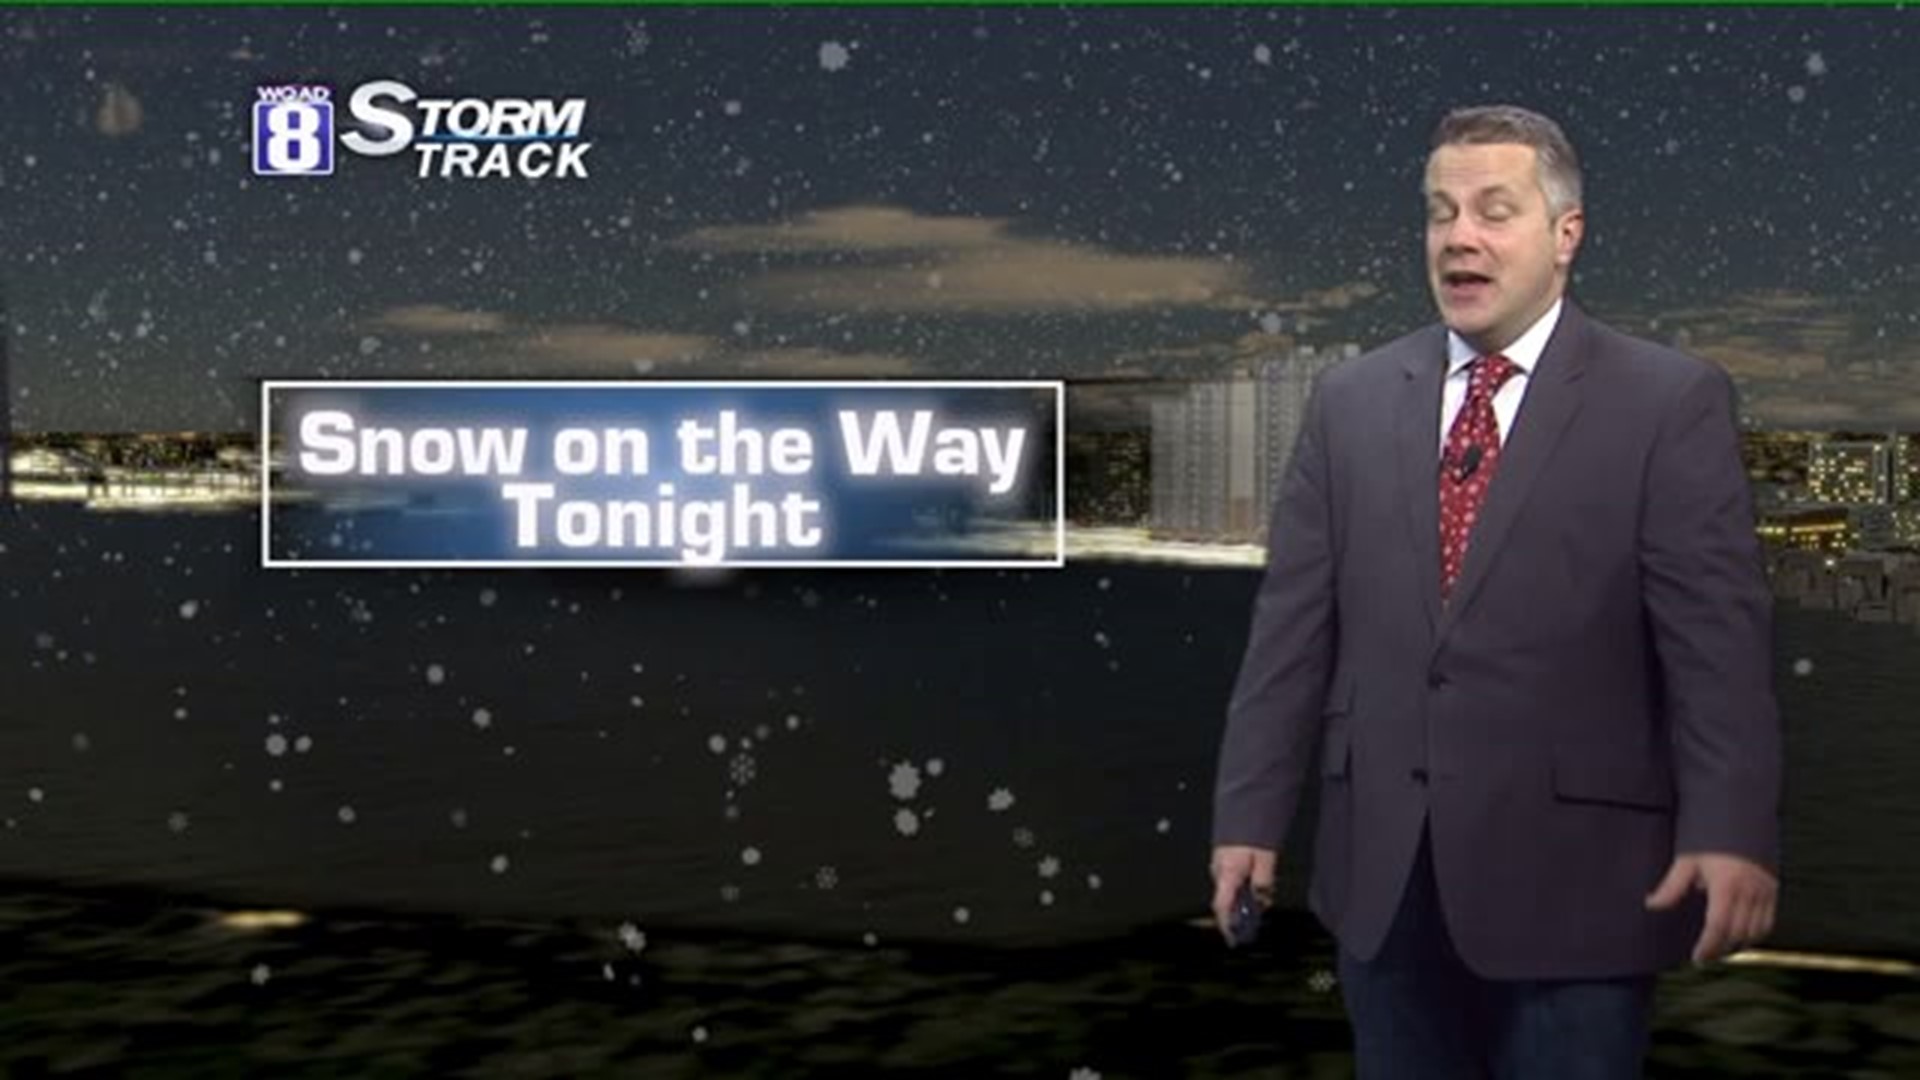 Tracking snow for early Thursday